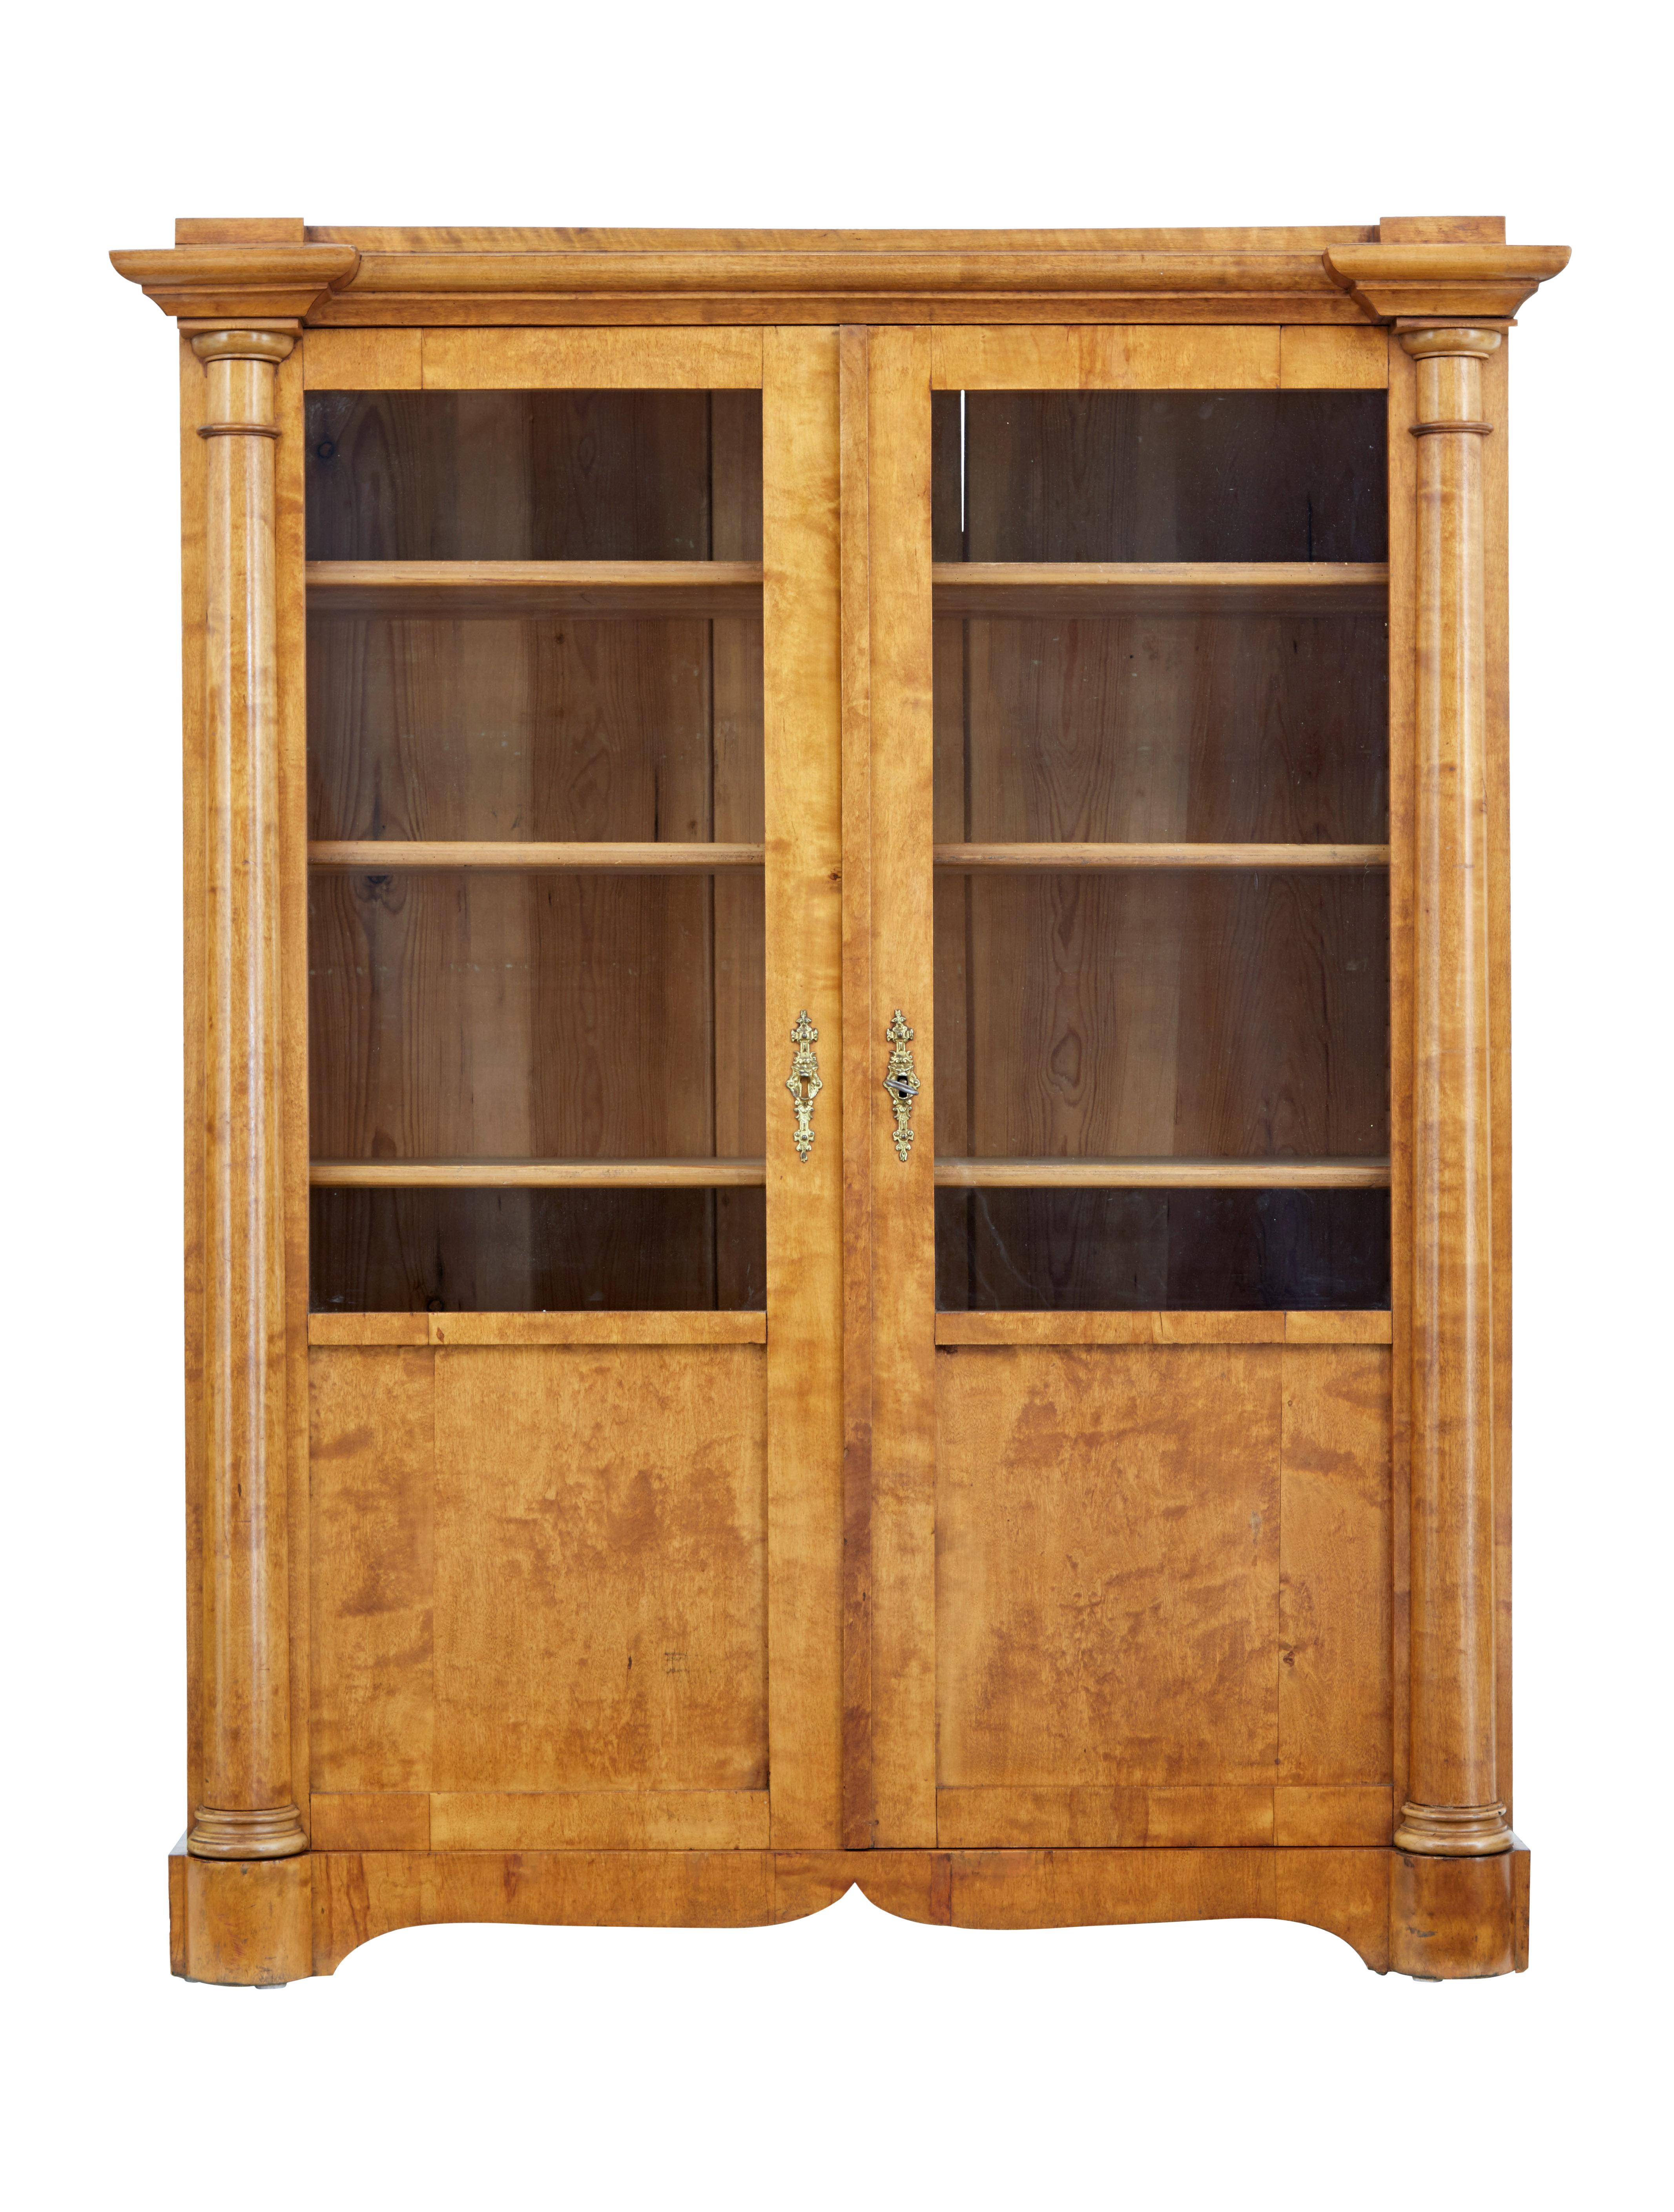 Elegant piece of Empire revival furniture, circa 1880.

Breakfront top surface which leads down to the turned columns which form the main feature each side of the piece. Part glazed double doors open to reveal an interior of 4 adjustable